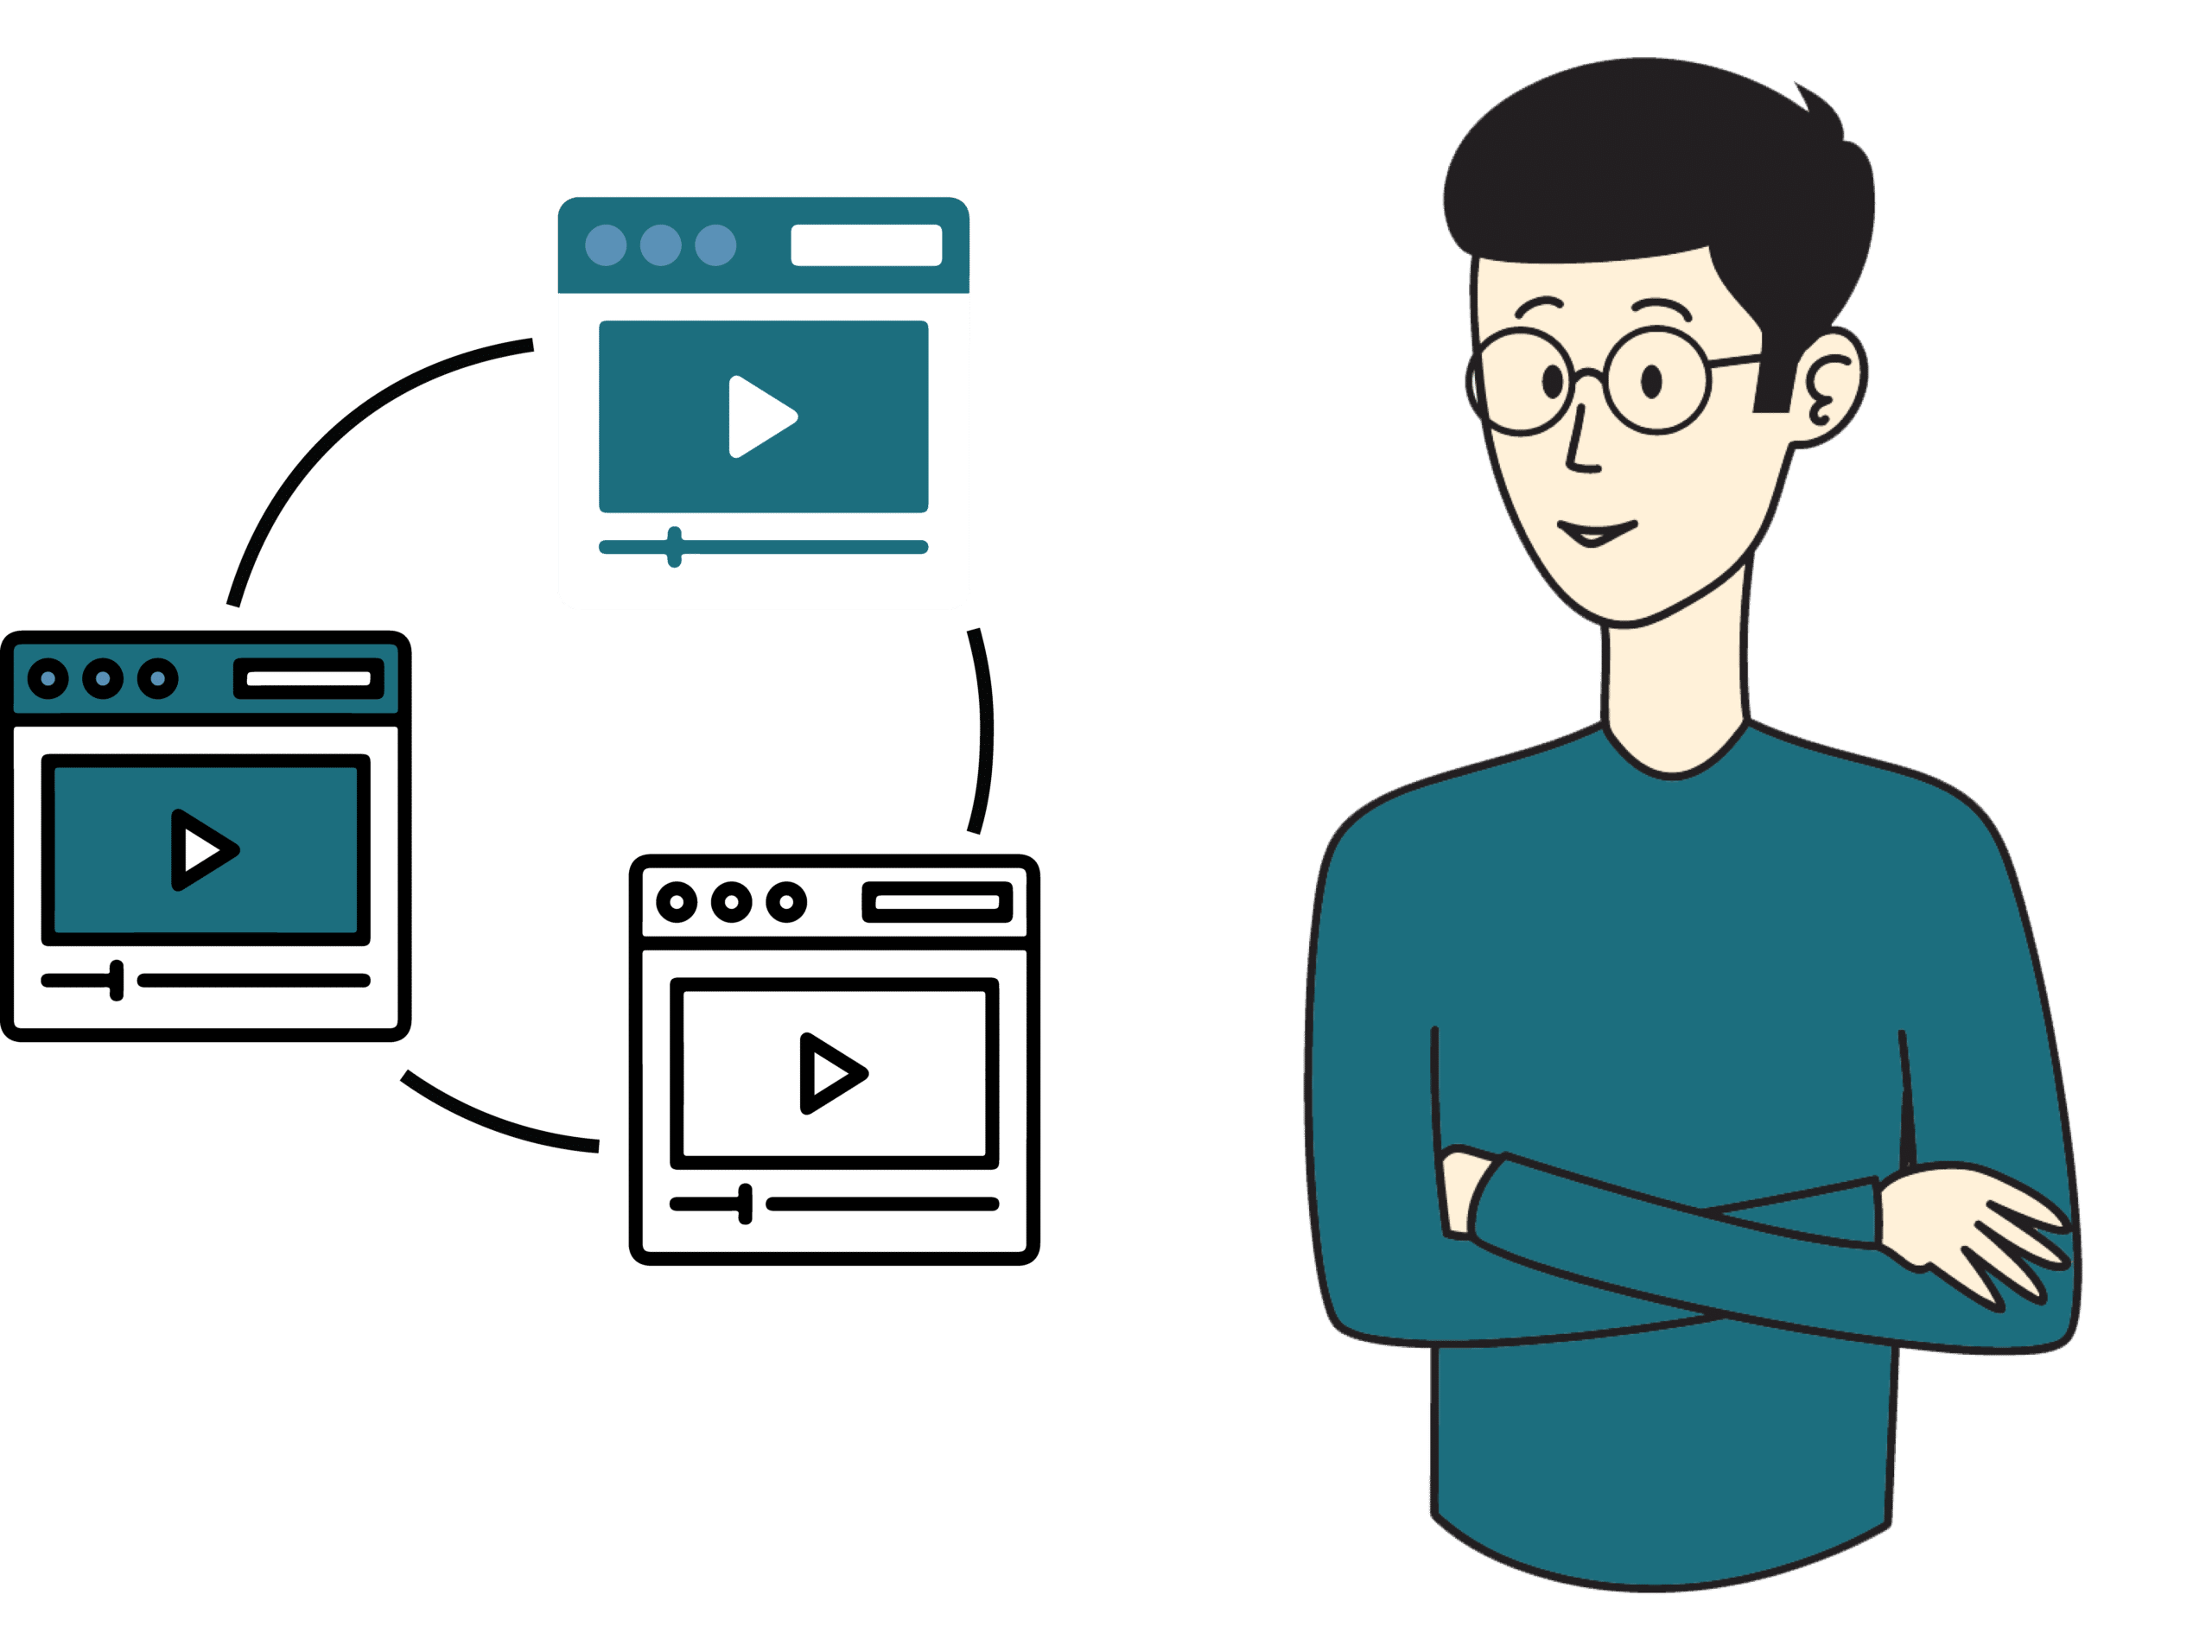 Poster of styles of explainer videos which we provide in our explainer video company